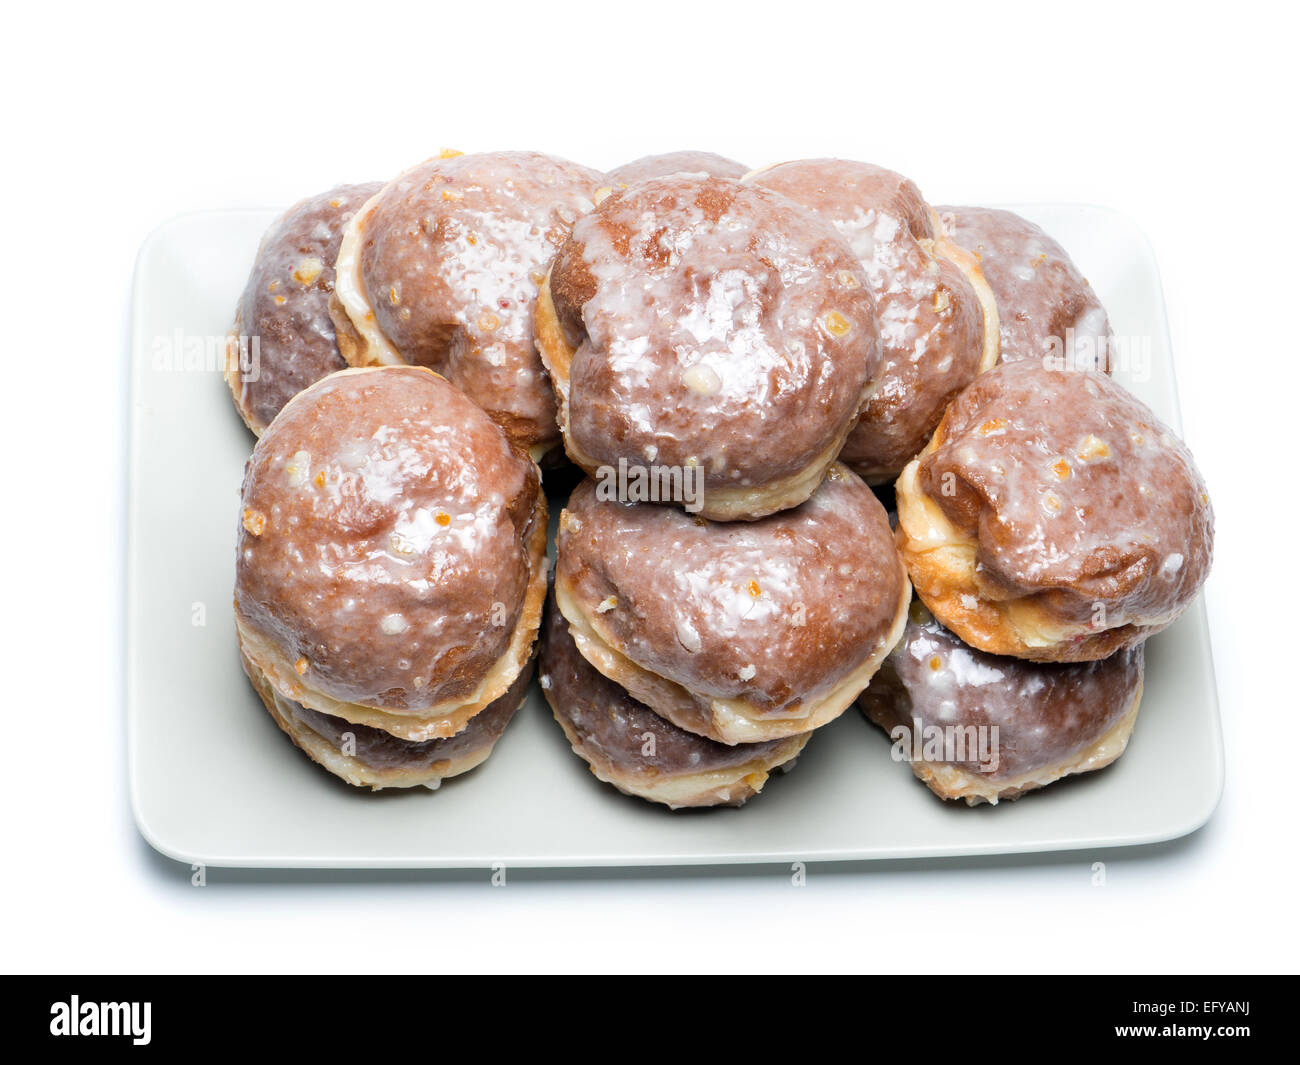 Polish donuts on plate shot on white Stock Photo